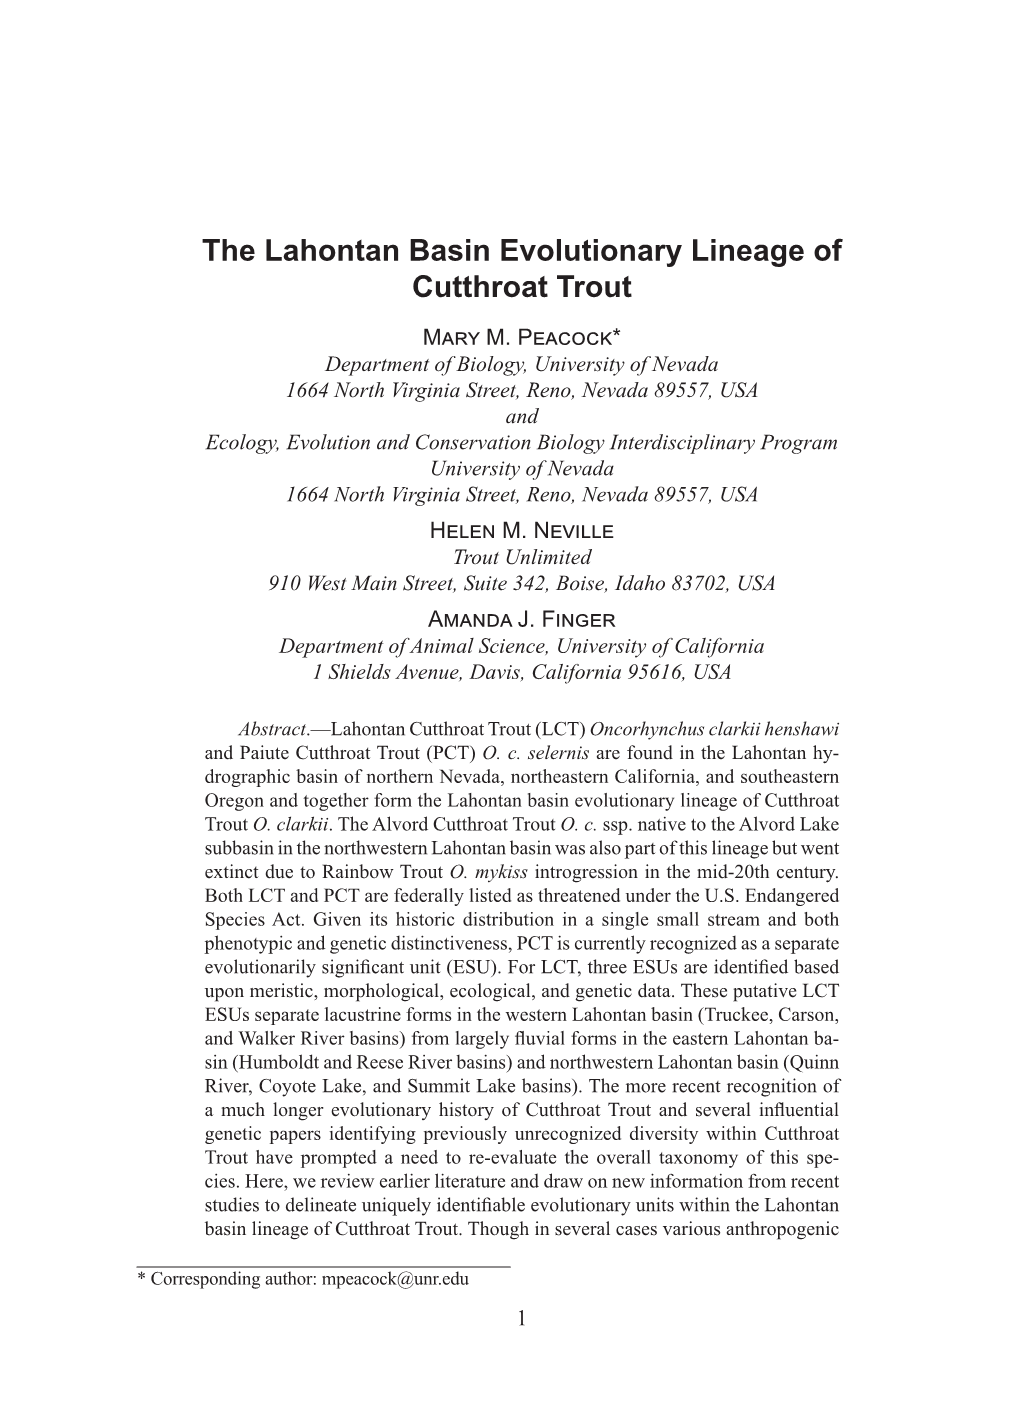 The Lahontan Basin Evolutionary Lineage of Cutthroat Trout Mary M